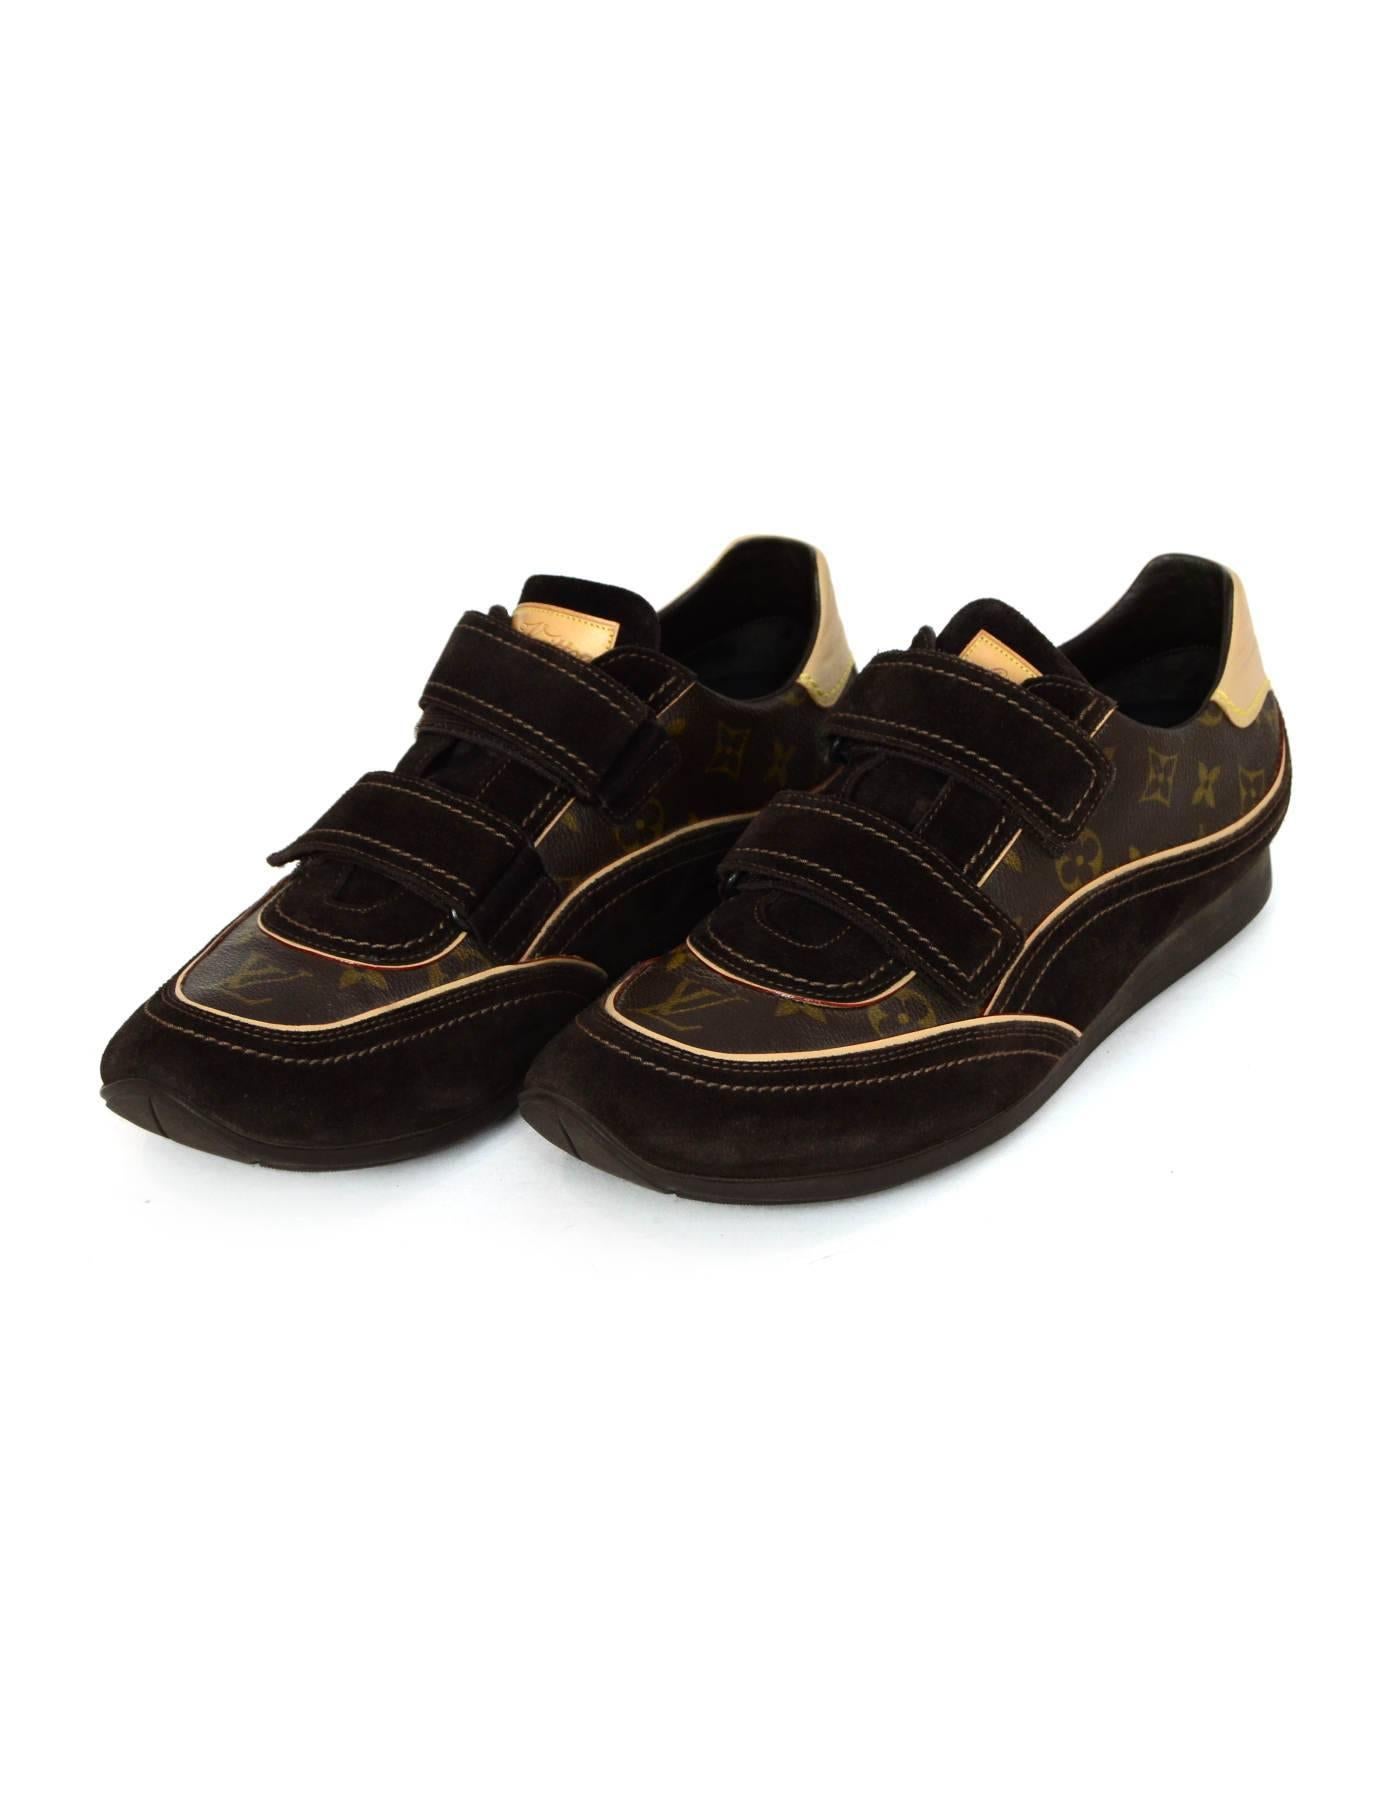 Louis Vuitton's Men's Monogram Speeding Velcro Sneakers Sz 11

Made In: Italy
Color: Brown
Materials: Coated canvas, suede, vachetta leather
Closure/Opening: Velcro closure
Sole Stamp: Louis Vuitton made in Italy
Retail Price: $470 + Tax
Overall